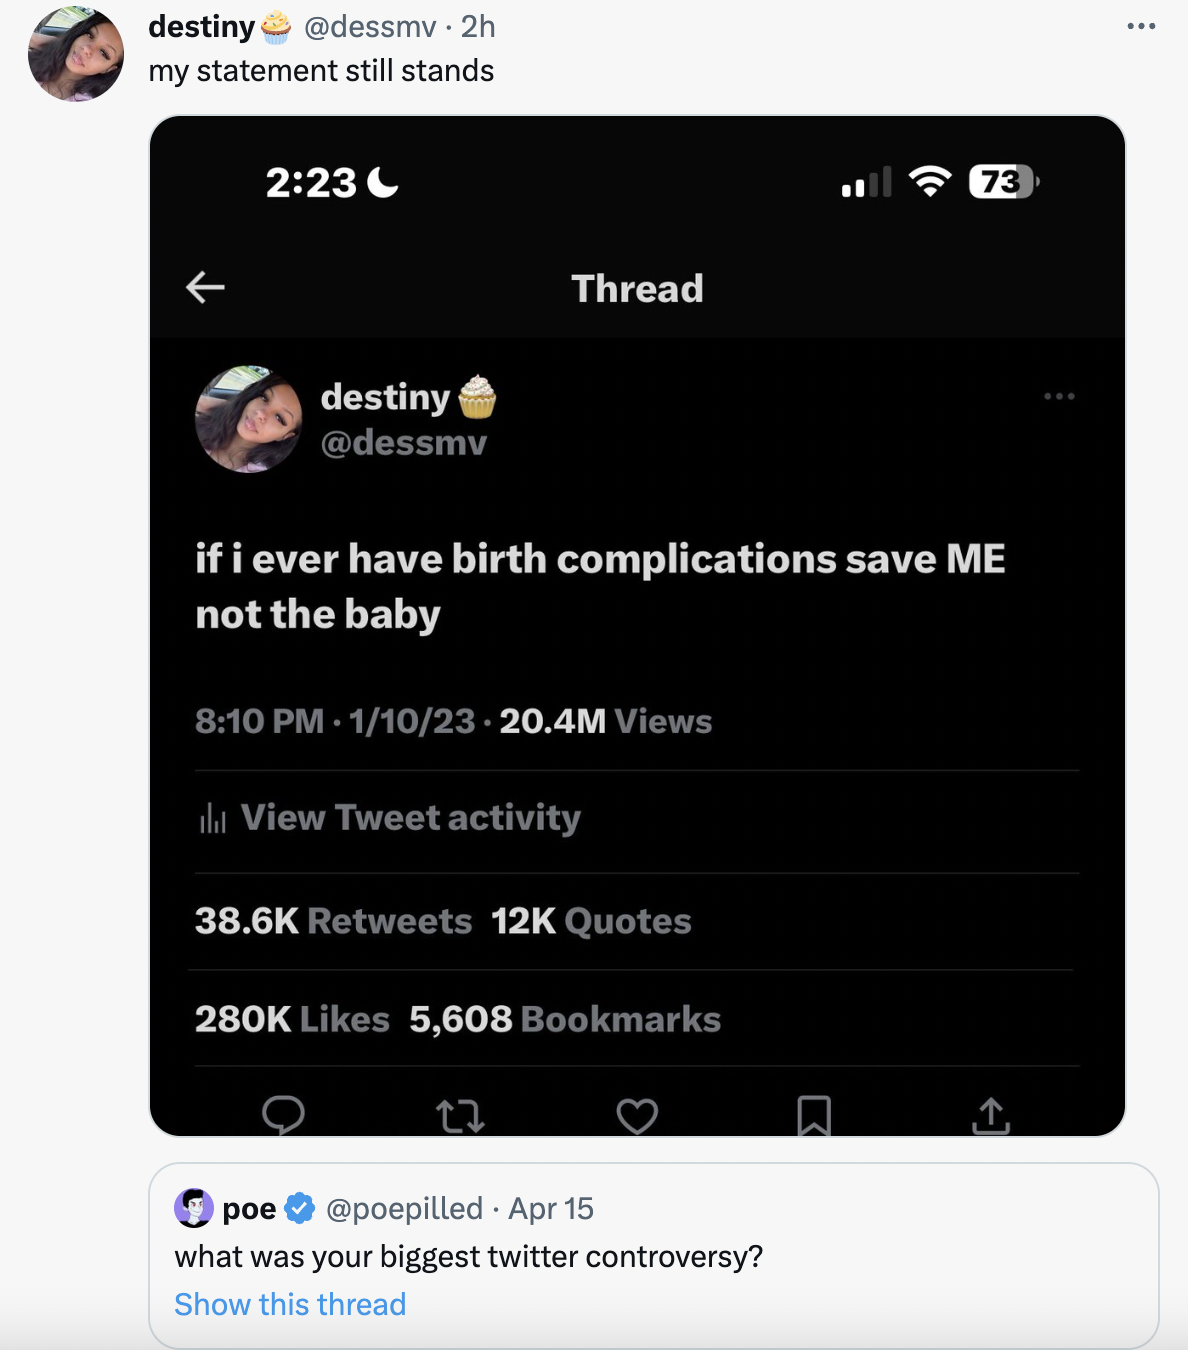 controversial tweets - screenshot -  my statement still stands destiny Thread if i ever have birth complications save Me not the baby